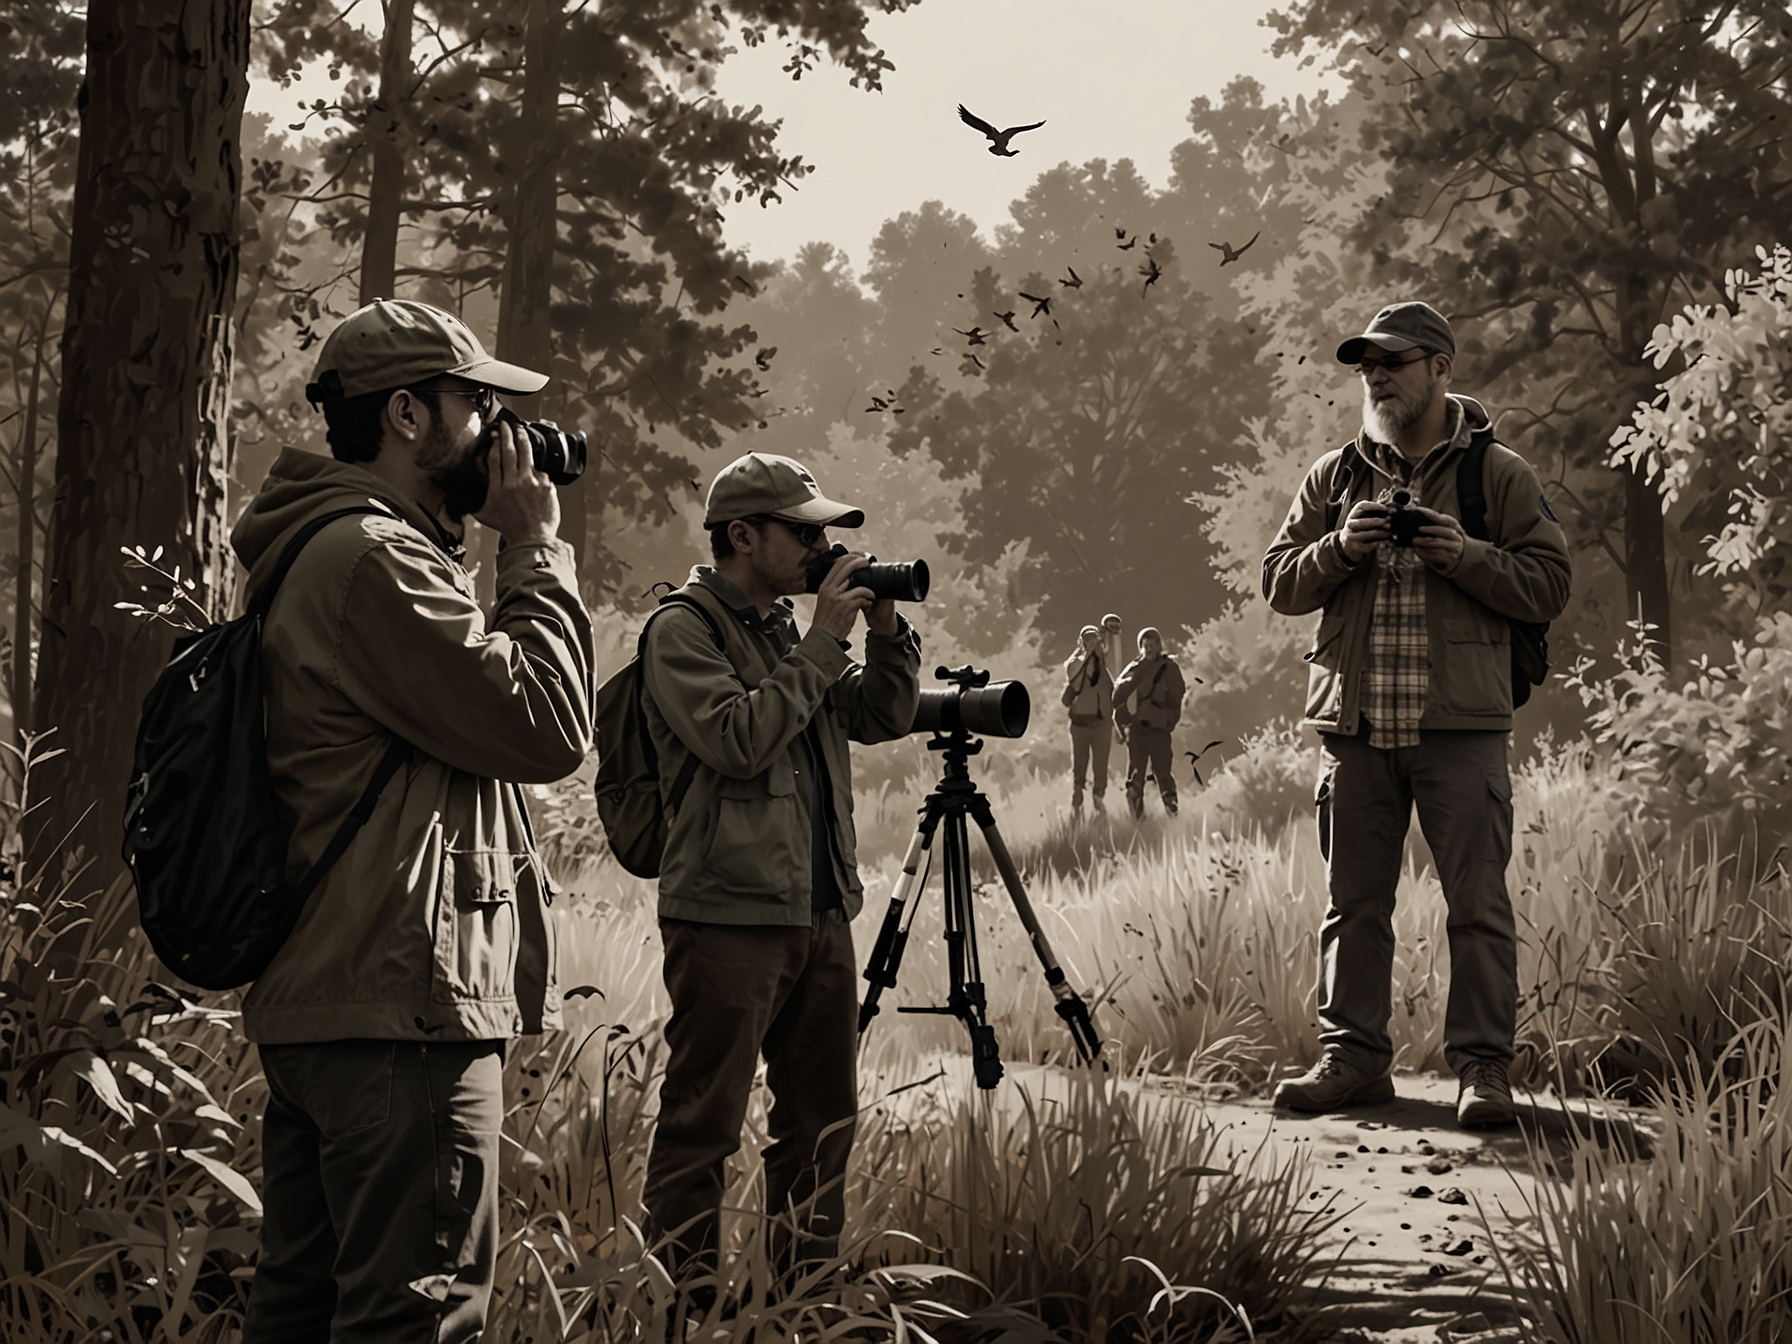 A diverse group of bird-watchers, equipped with binoculars and bird guides, scattered in Cottage Grove Ravine Regional Park, actively engaged in spotting various bird species early in the morning.